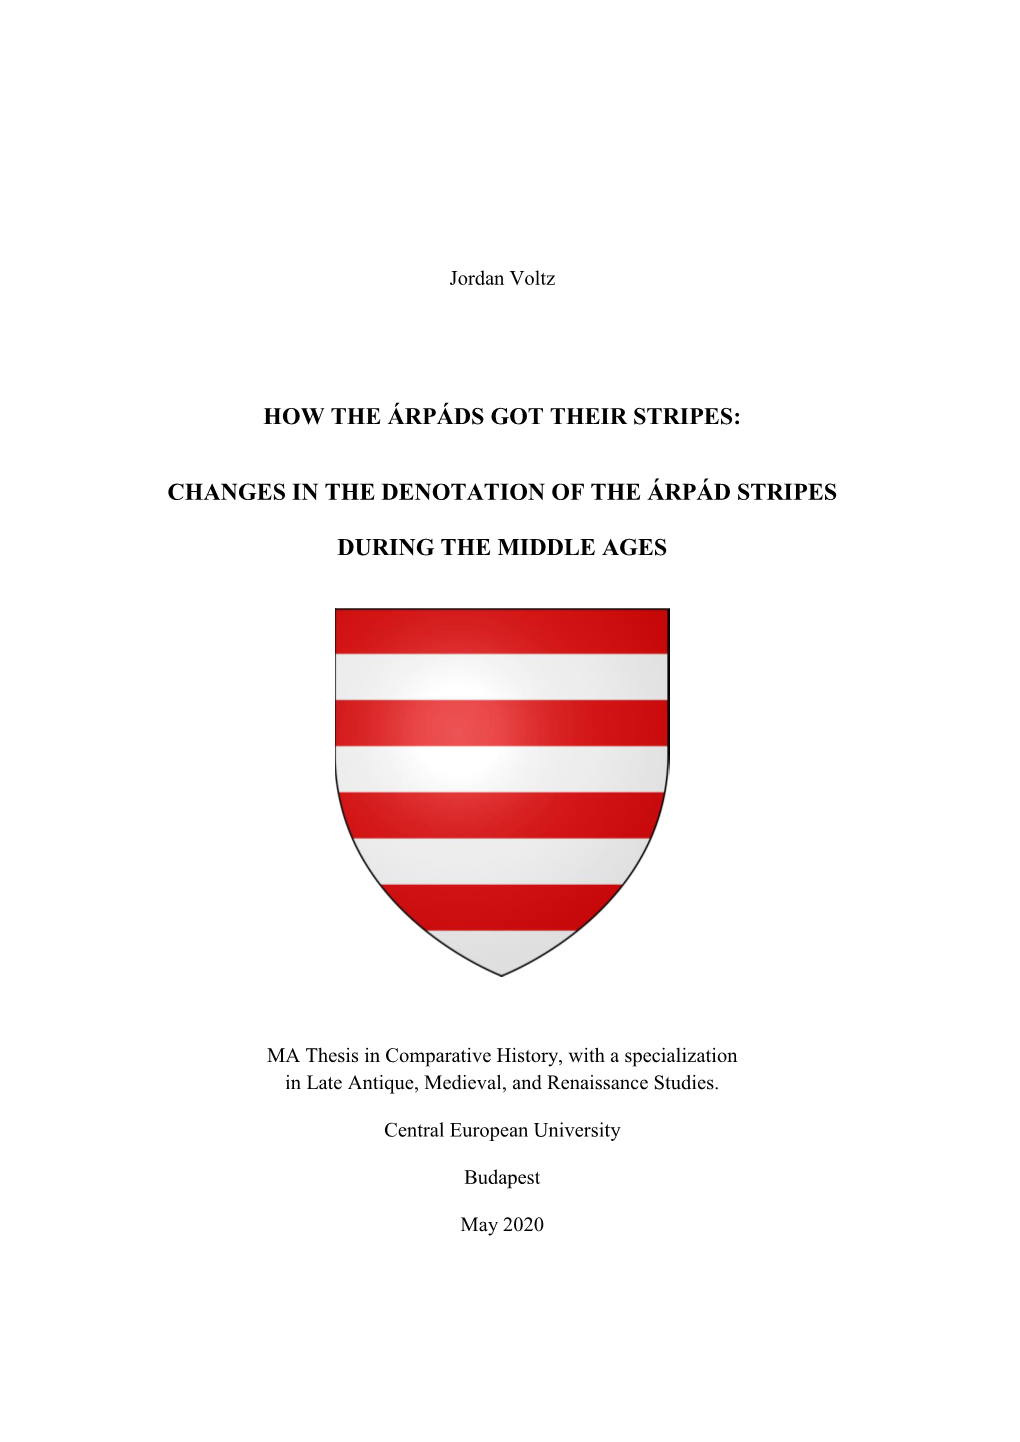 Changes in the Denotation of the Árpád Stripes During the Middle Ages